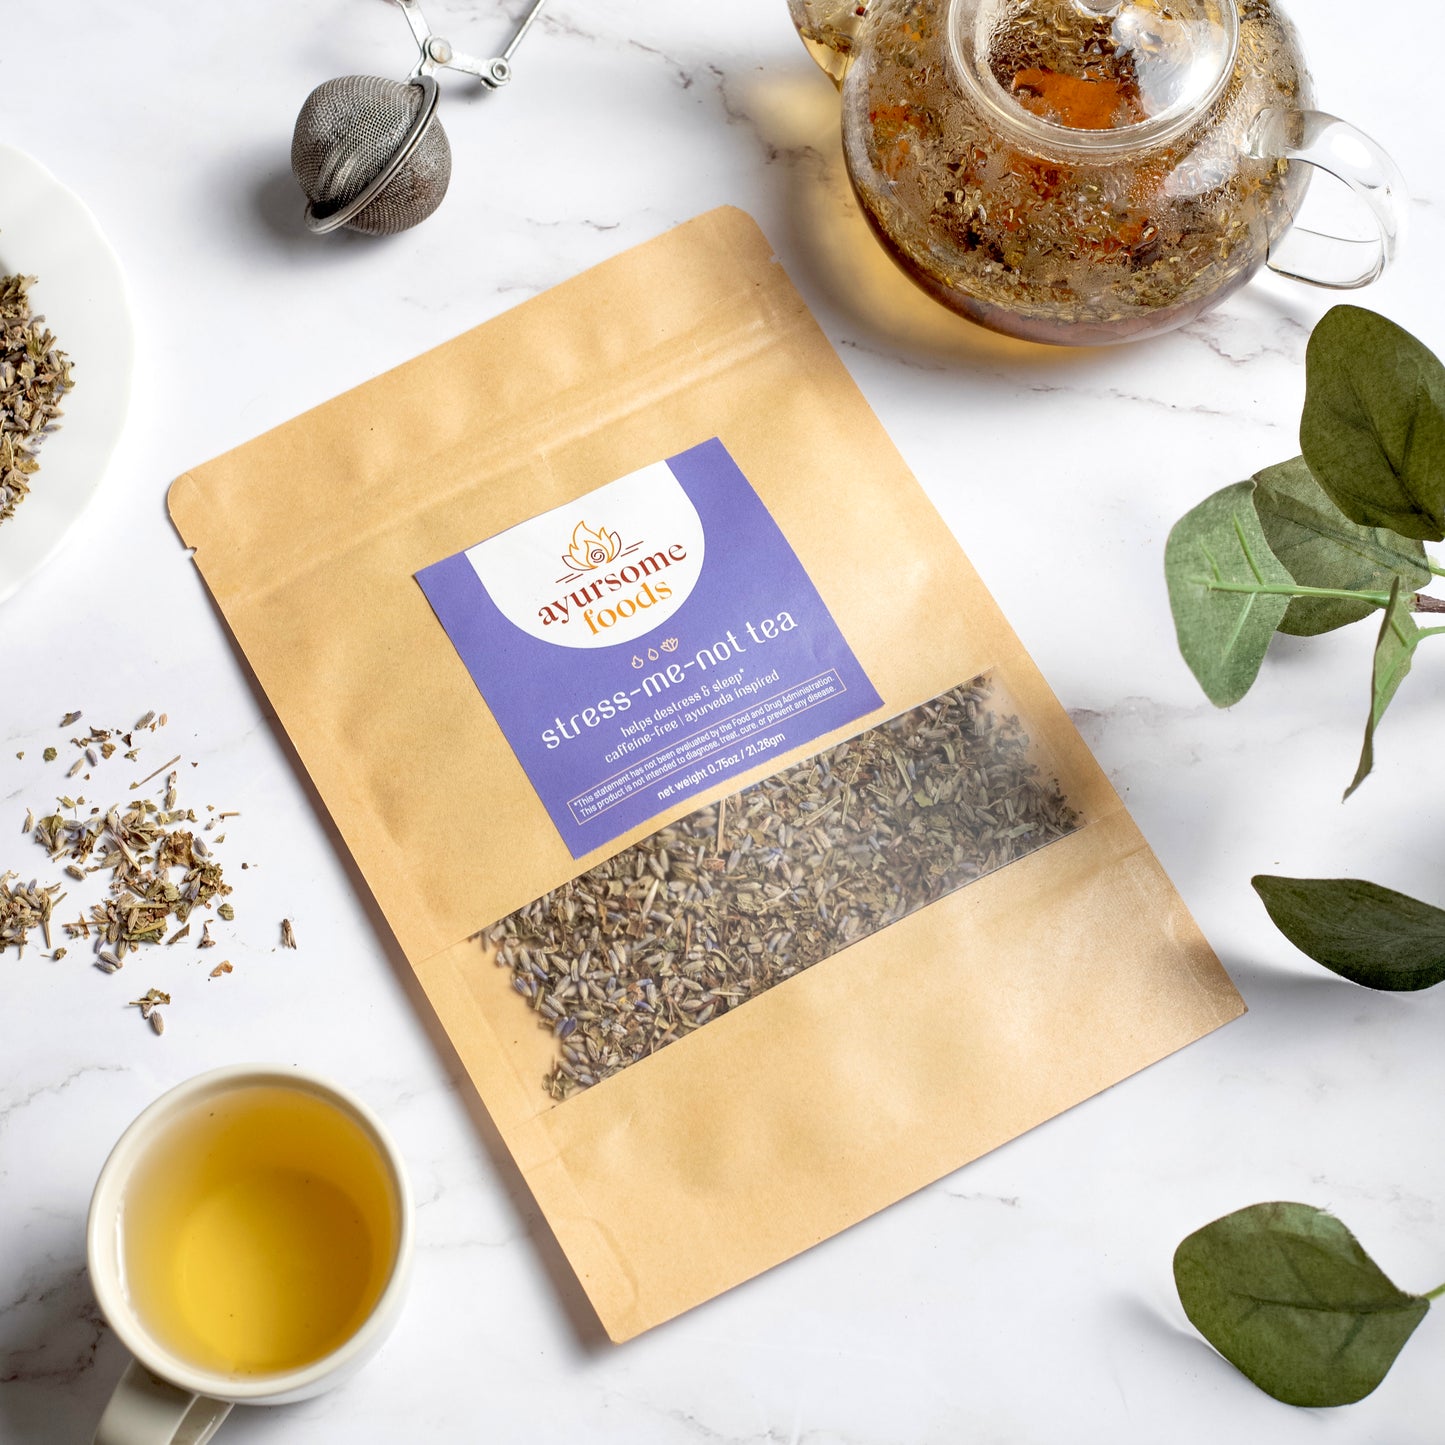 Ayurveda Tea for Stress relief containing Lavender tea and loose leaf Lemon Balm is packed in kraft paper pouch. Next to the tea for anxiety is a cup and pot of the brewed herbal tea and tea accessories